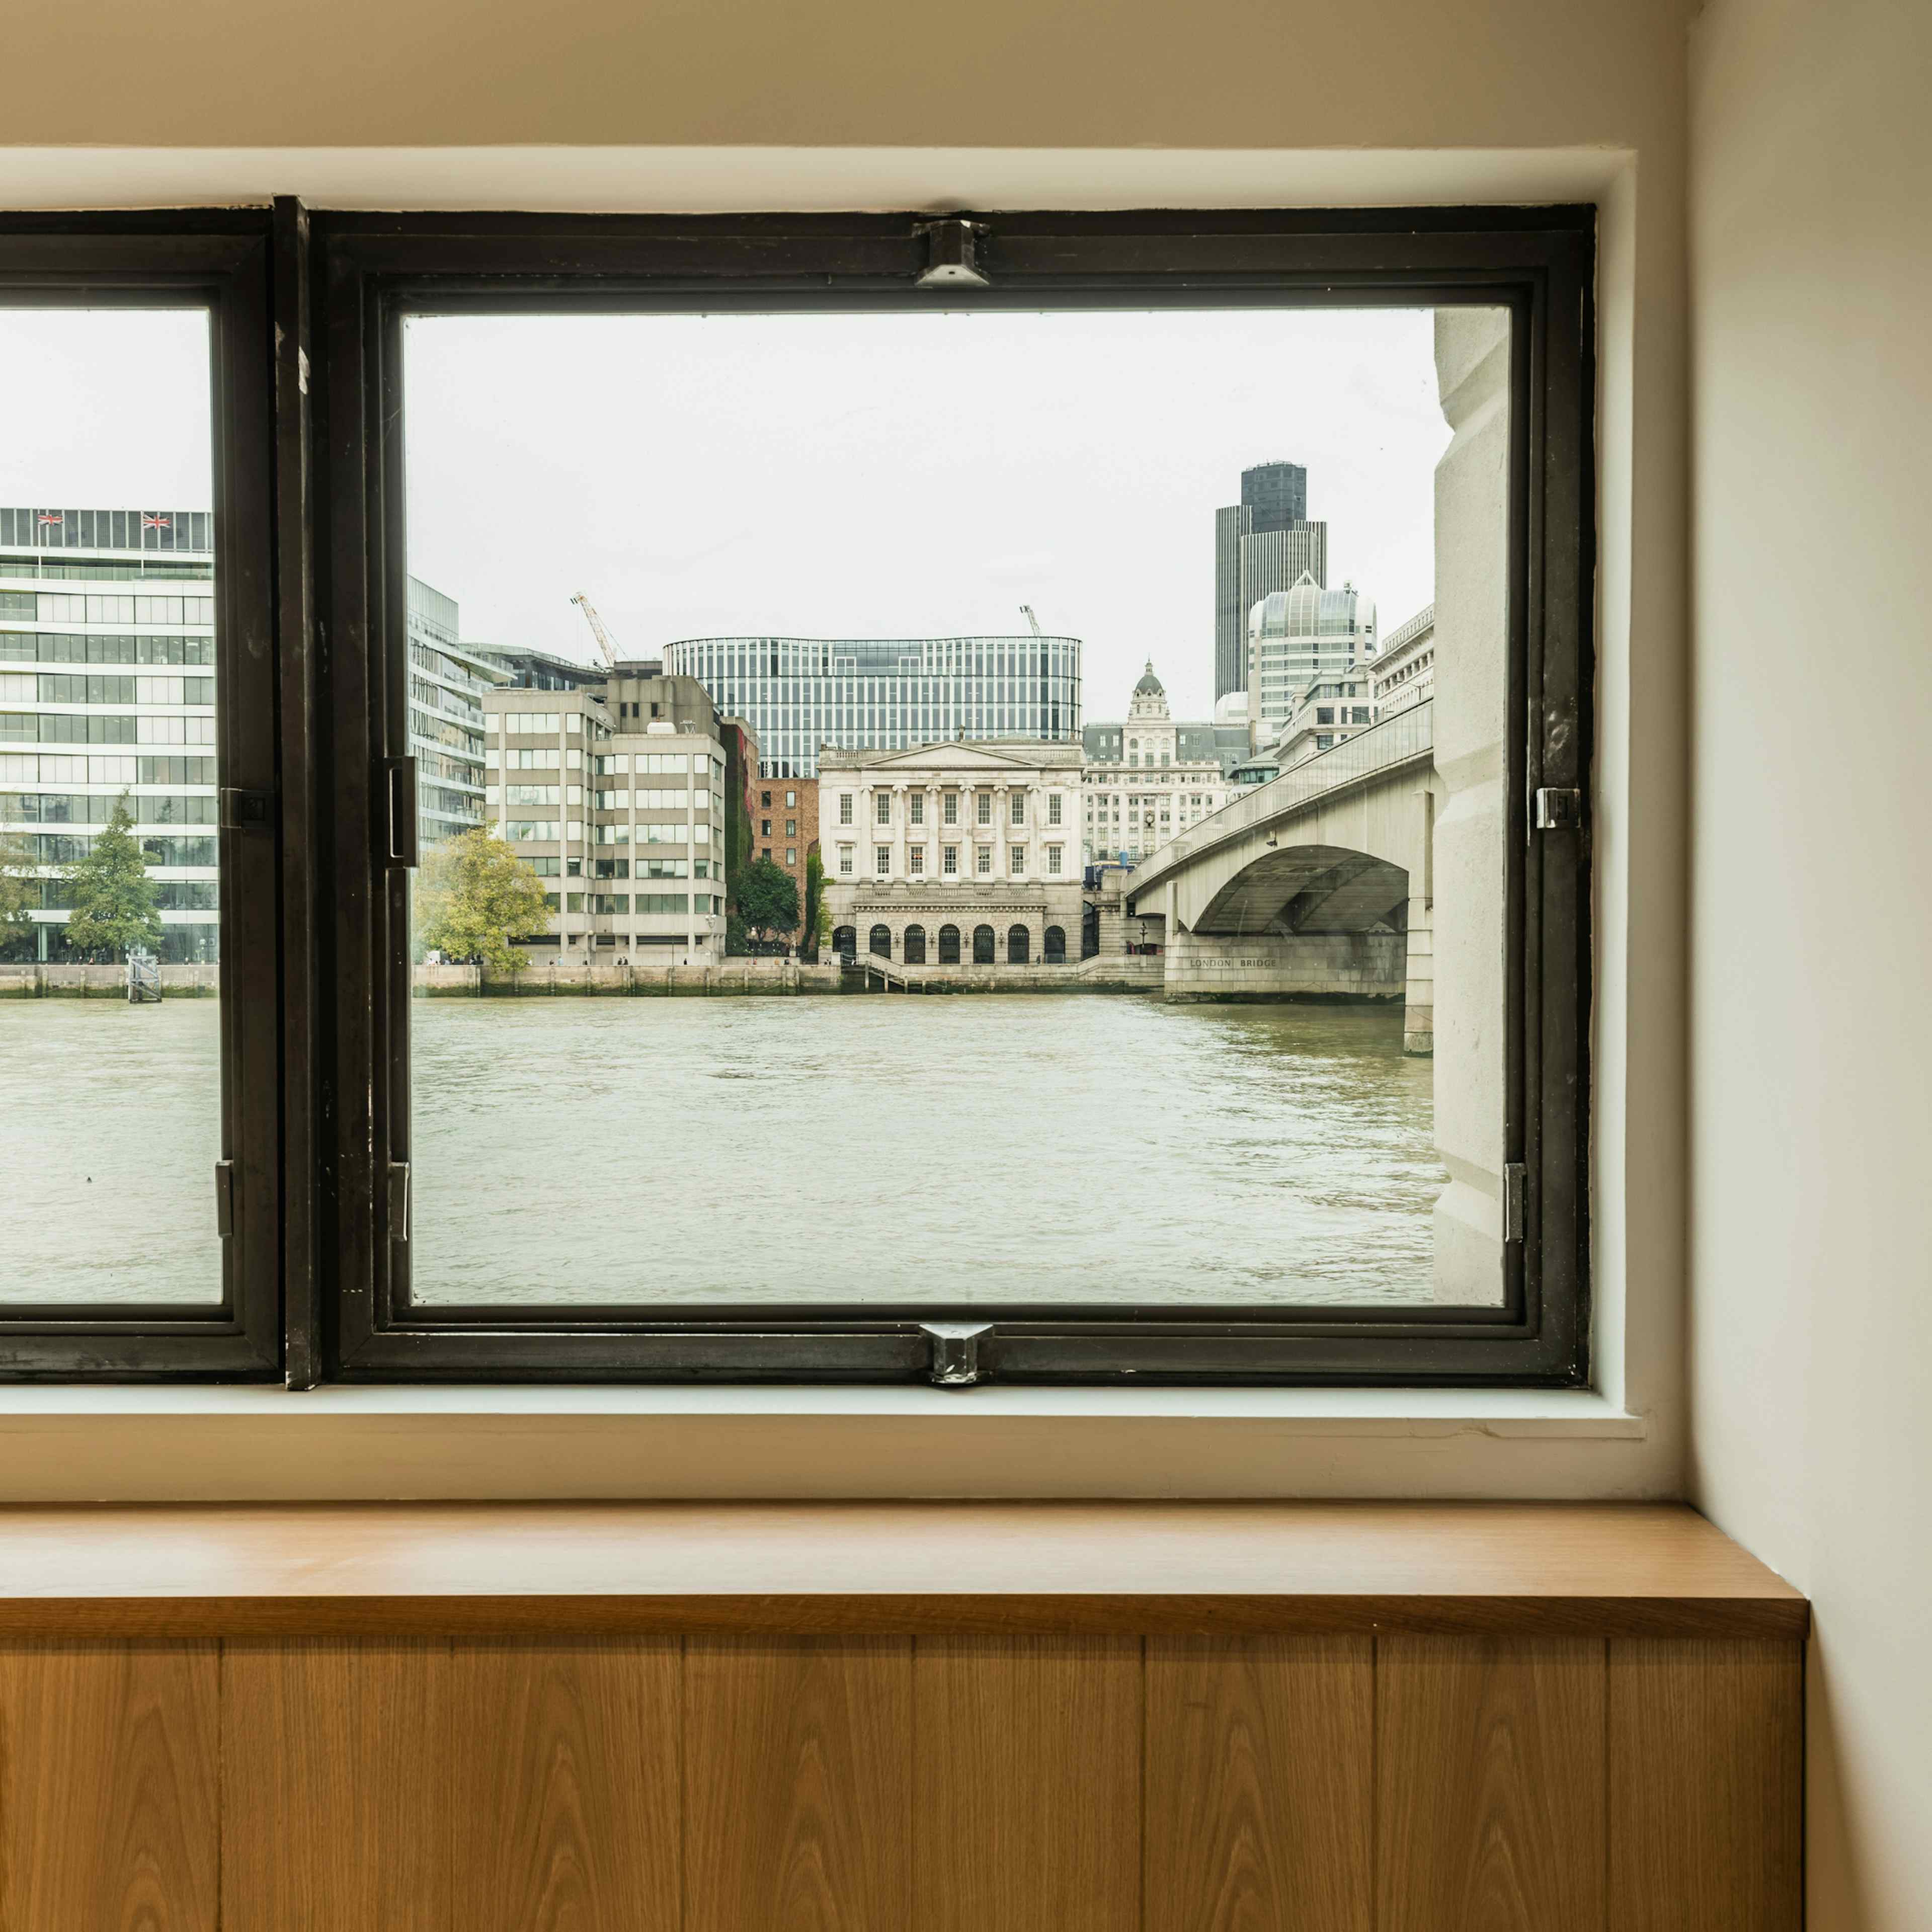 Glaziers Hall - The Thames Room image 3